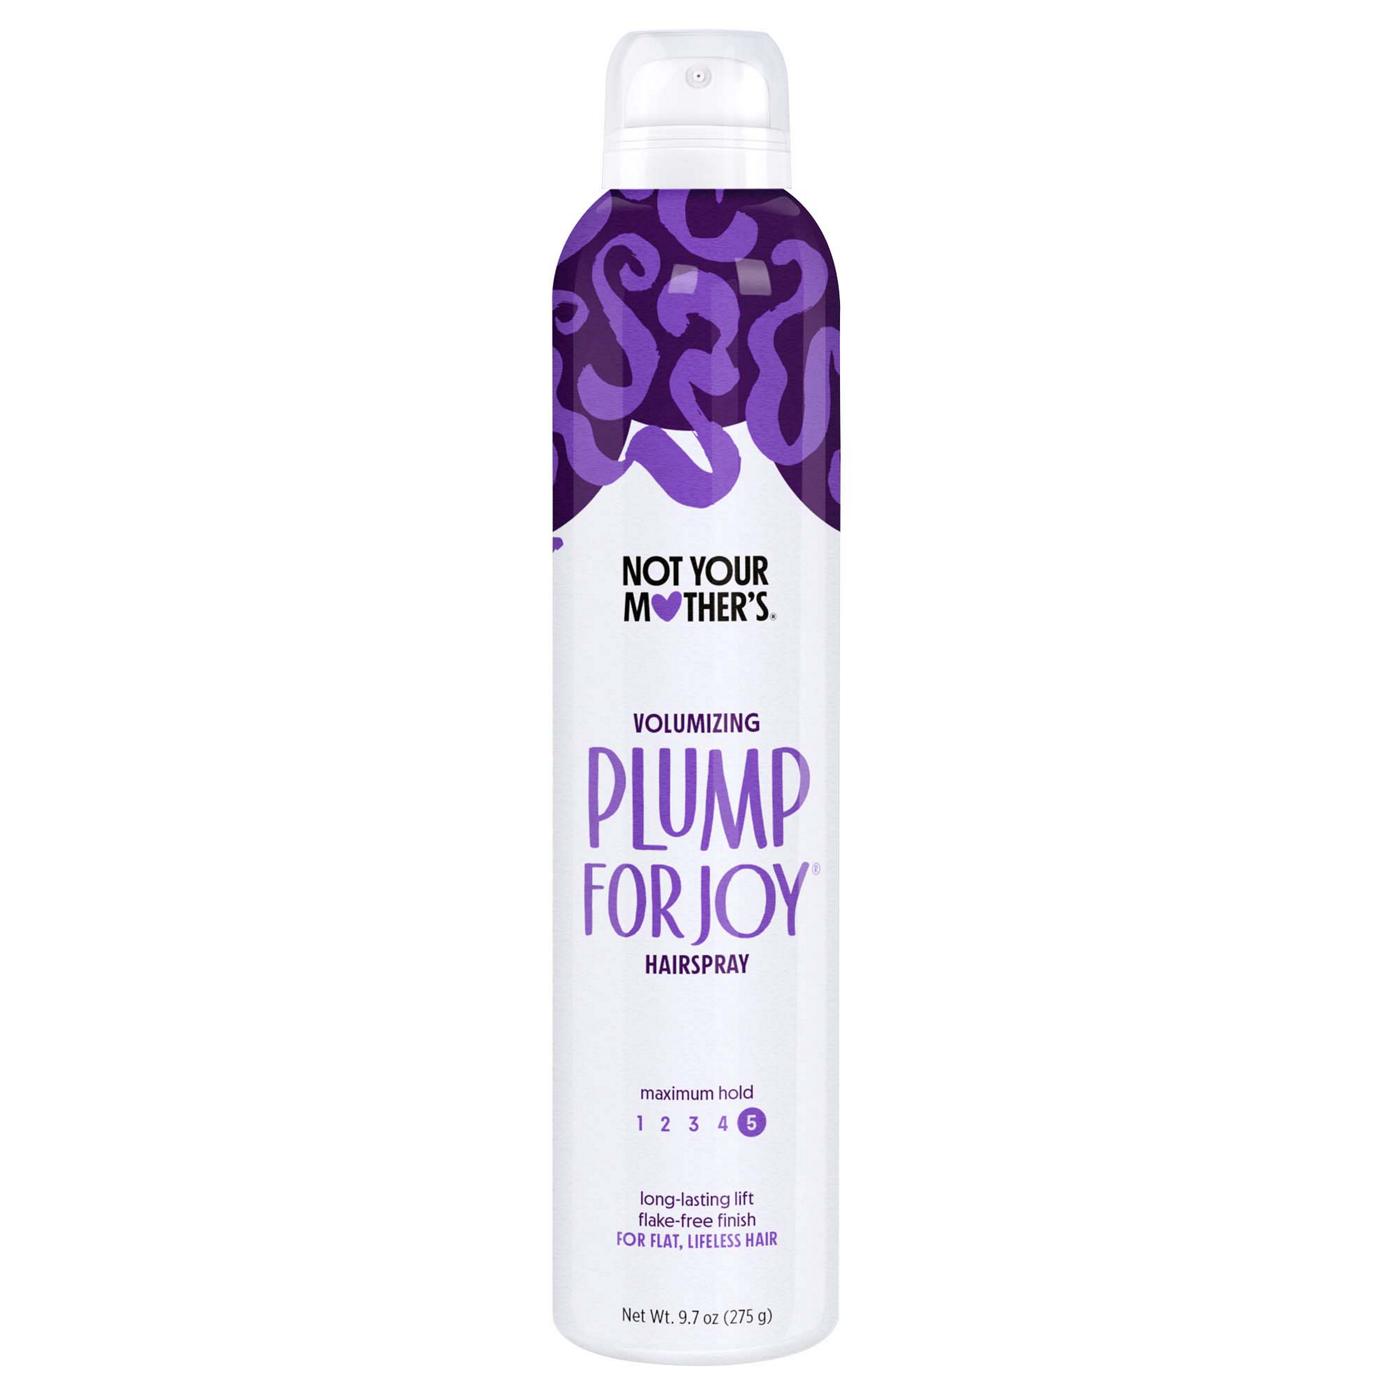 Not Your Mother's Volumizing Plump For Joy Hairspray; image 1 of 2